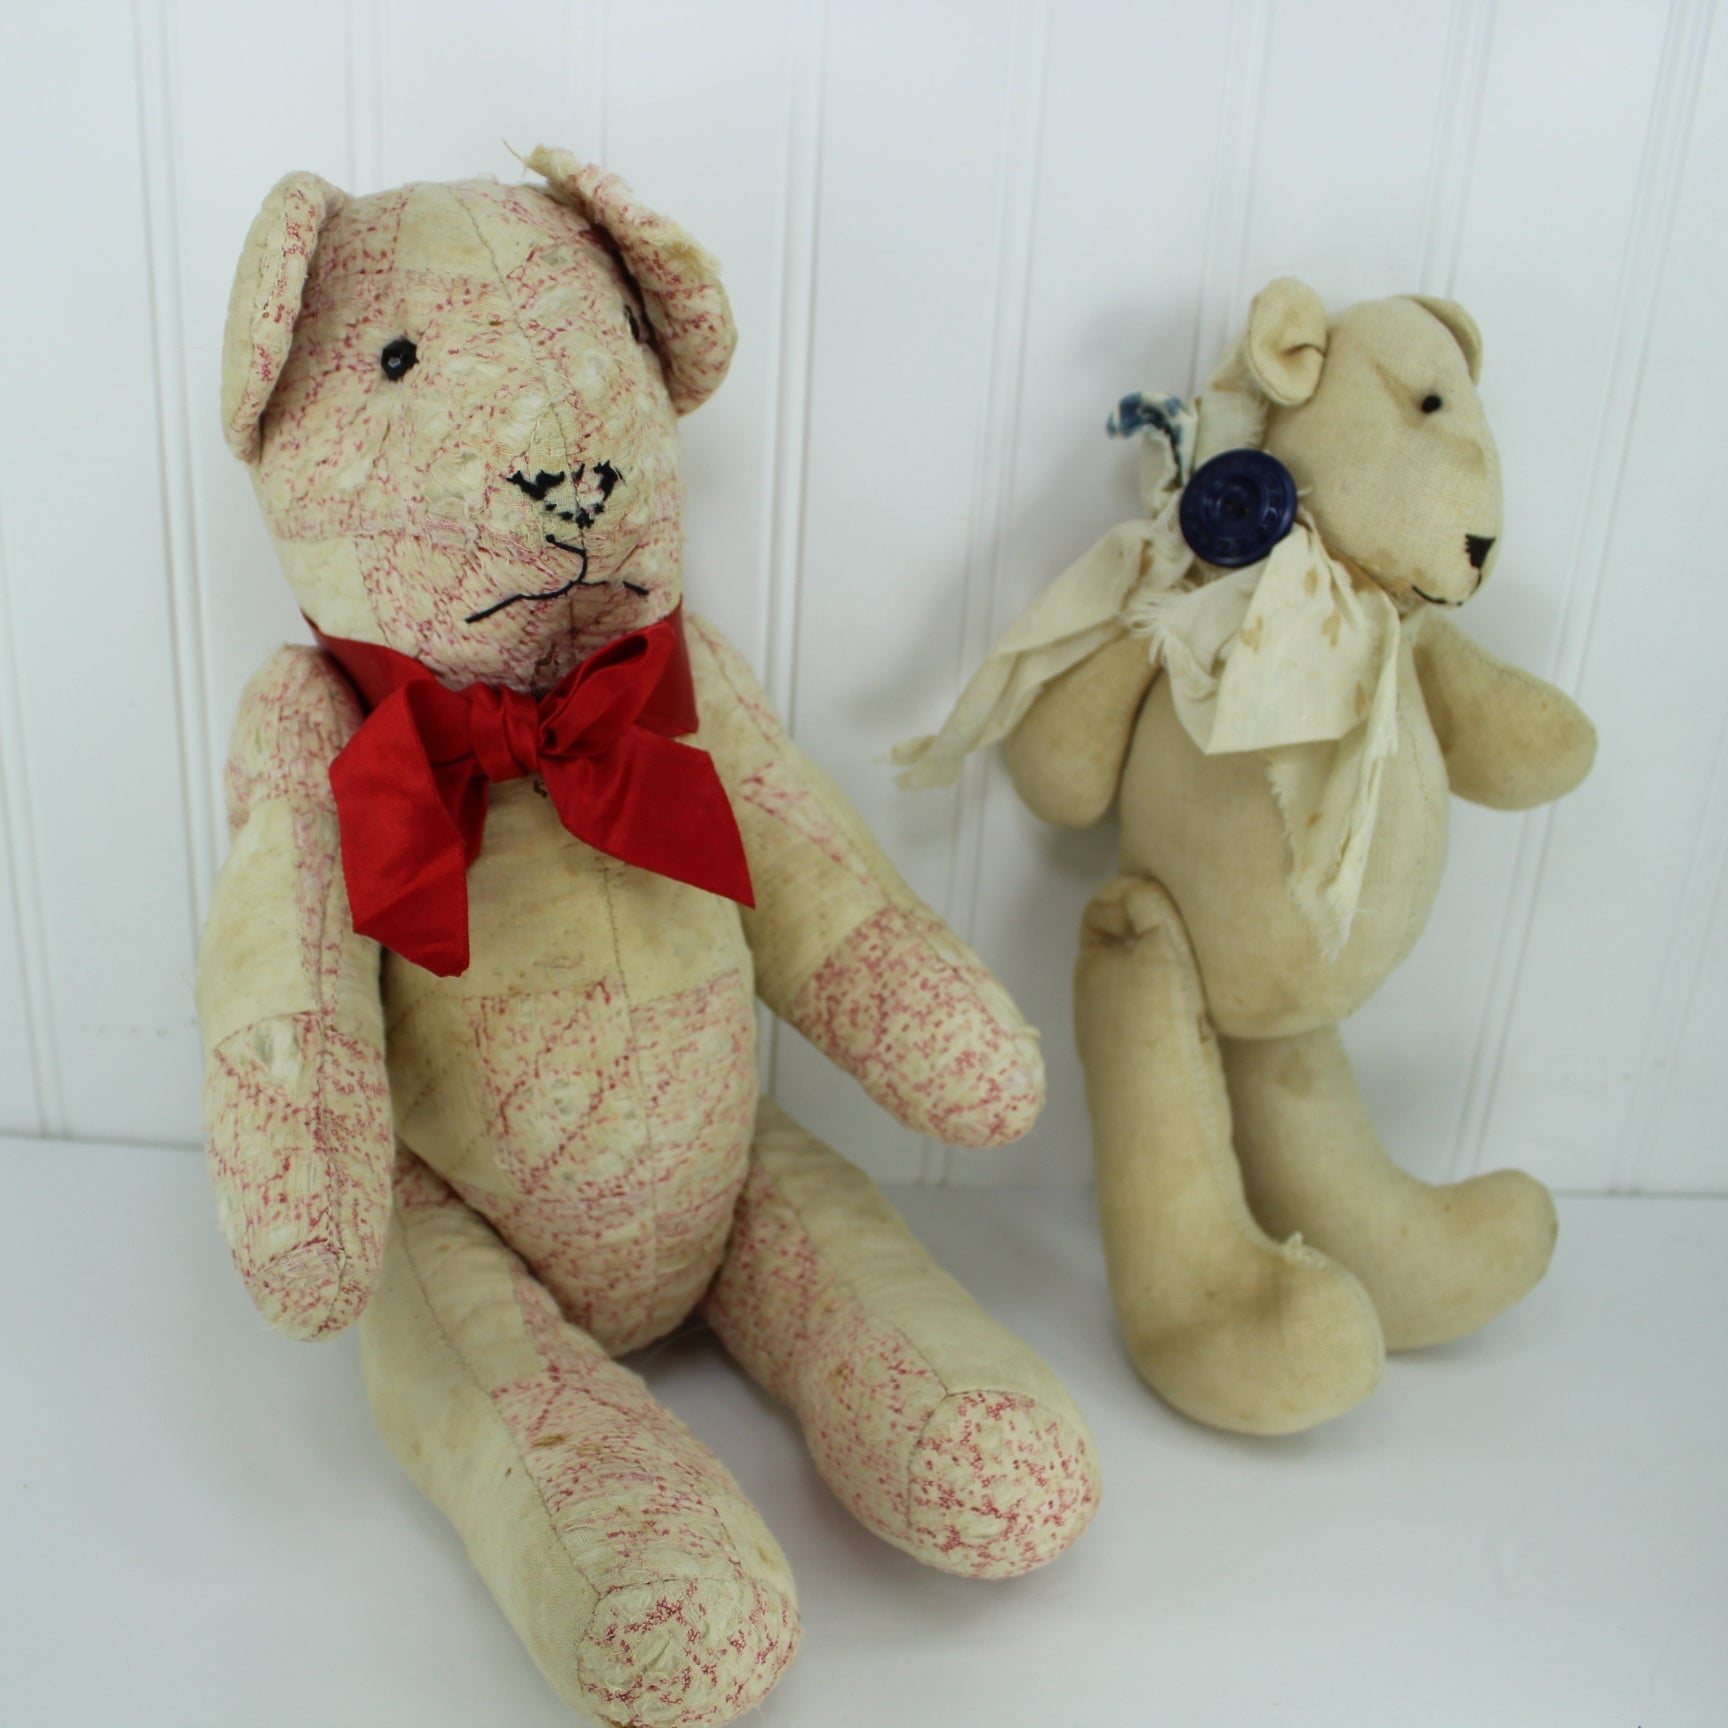 Vintage Hand Crafted Primitive Teddy Bears Old Quilted & Heavy Cotton Both Artisan Marked